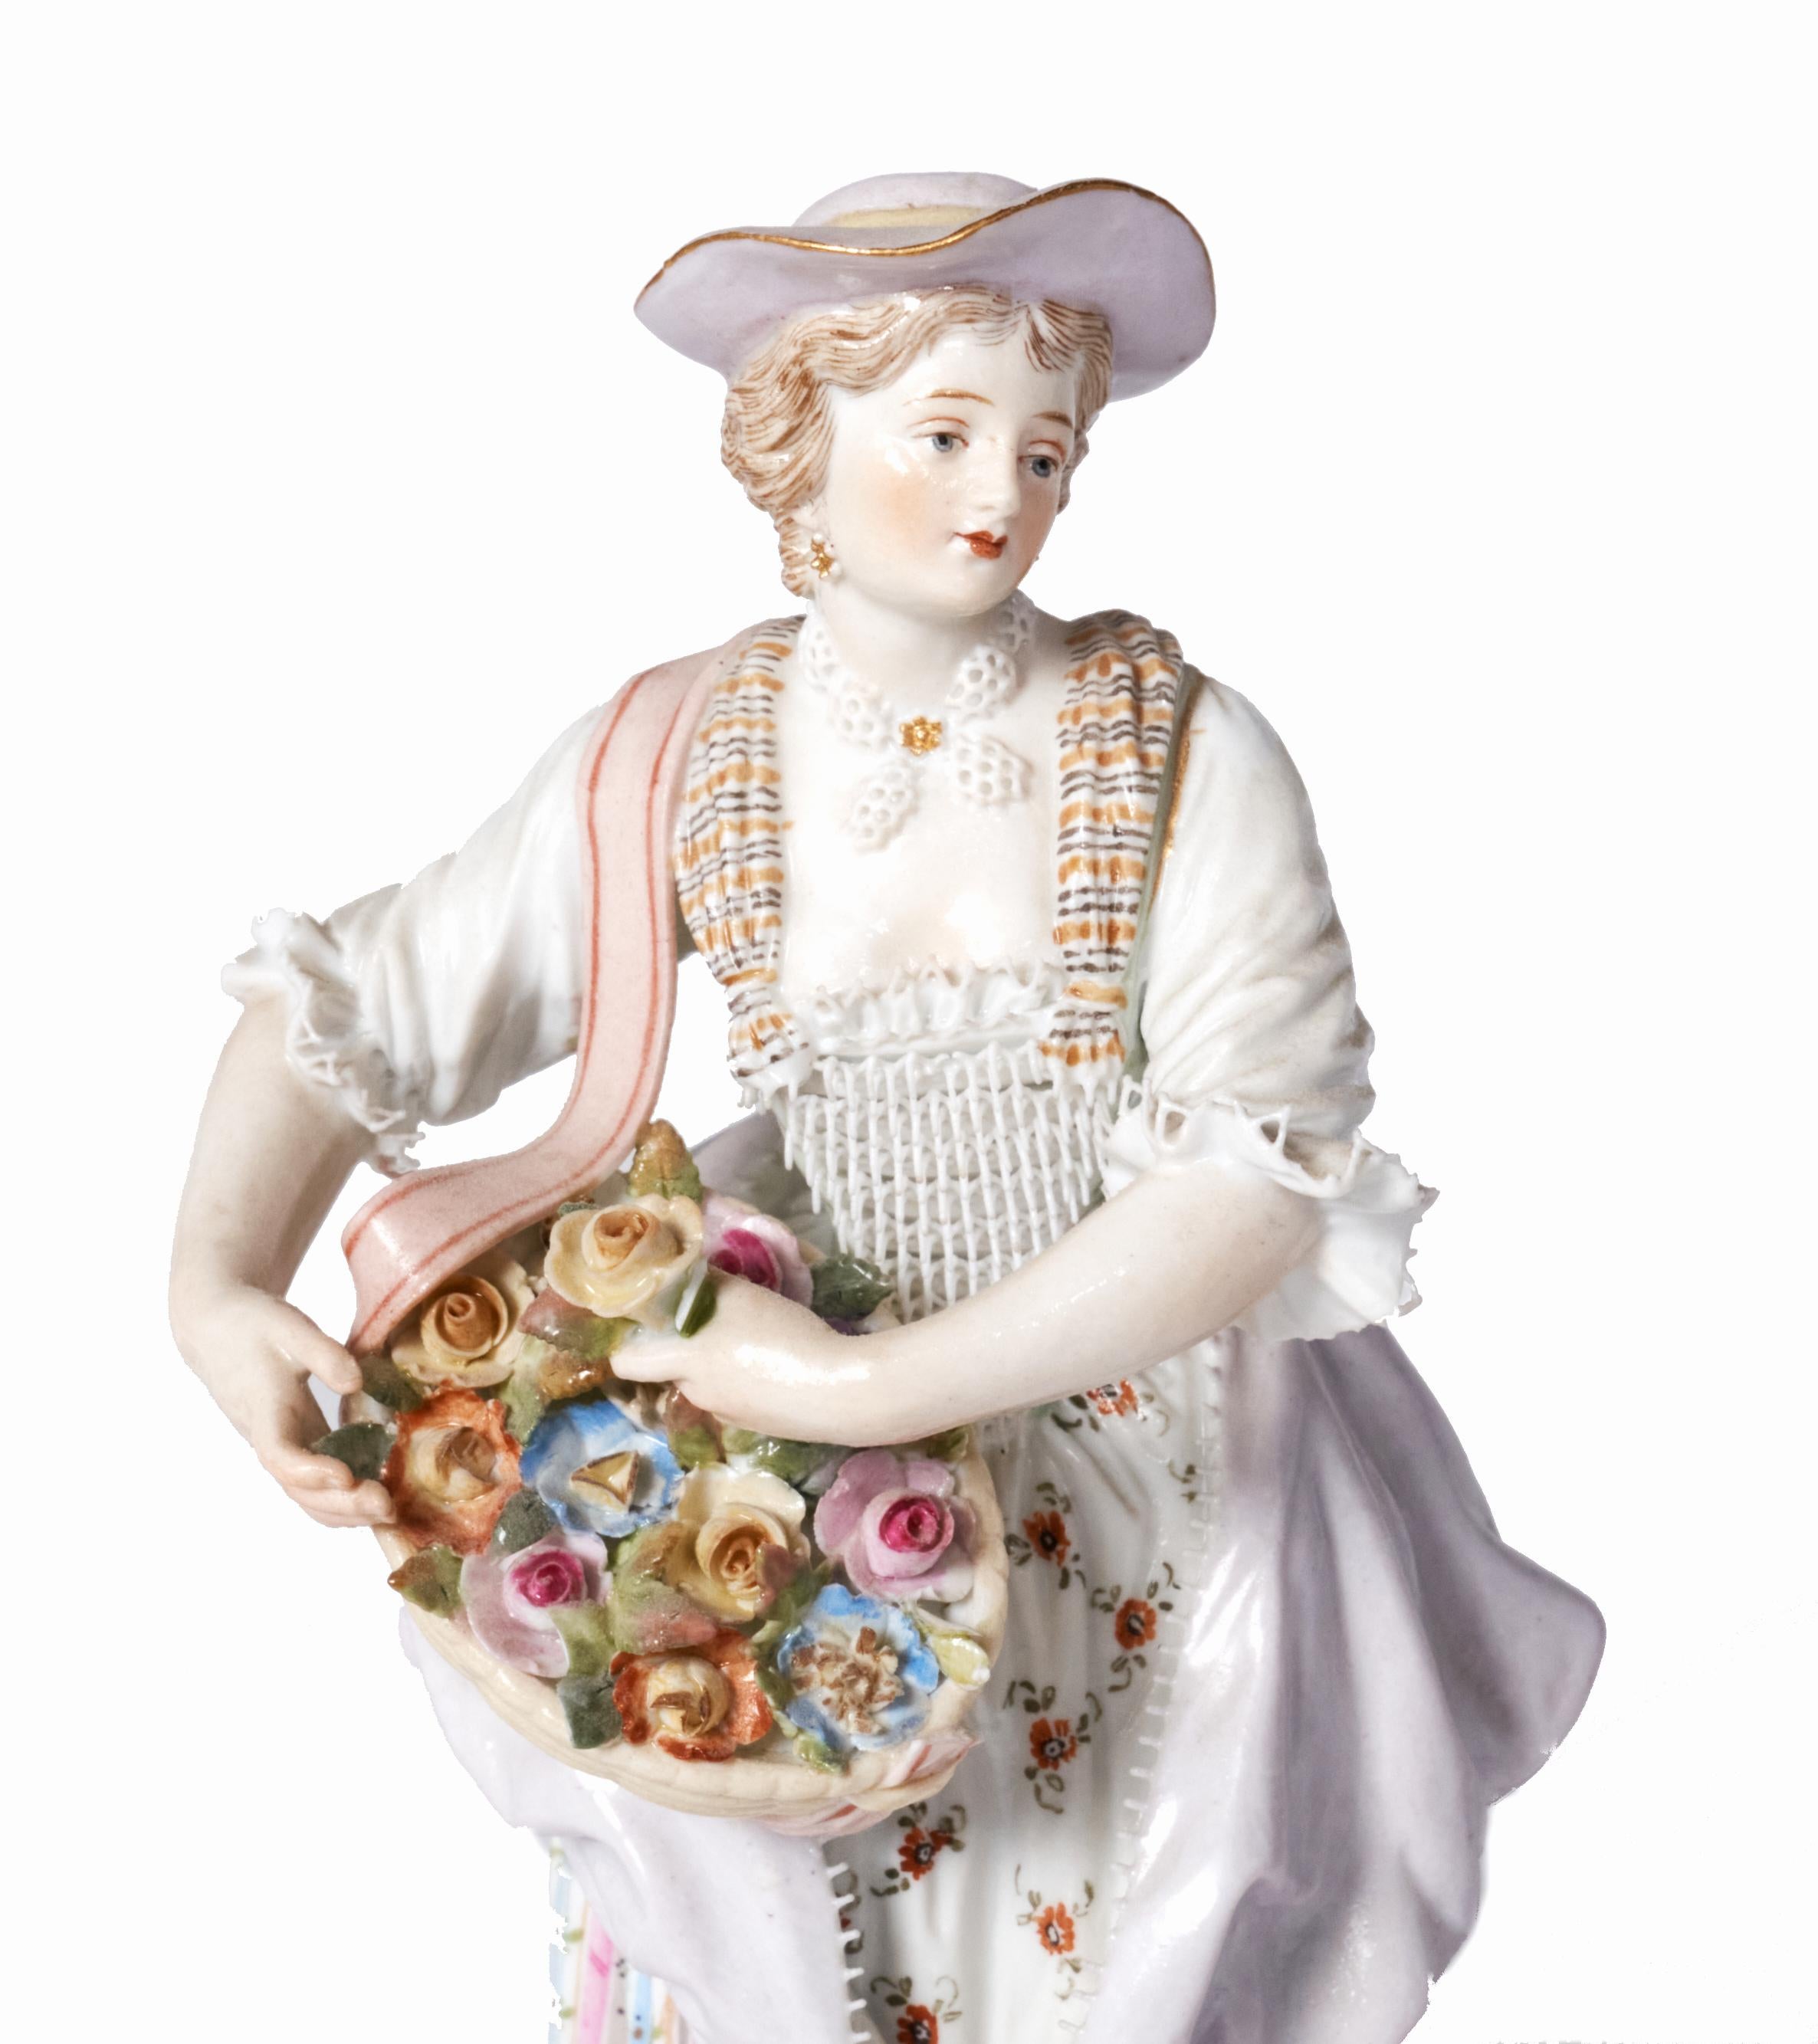 Lovely example of Meissen at it's best. This figurine of a beautiful woman with a basket of flowers is incredibly detailed. From the lace trim on her dress to the tiny flowers in her basket she is in excellent condition without cracks, chips or